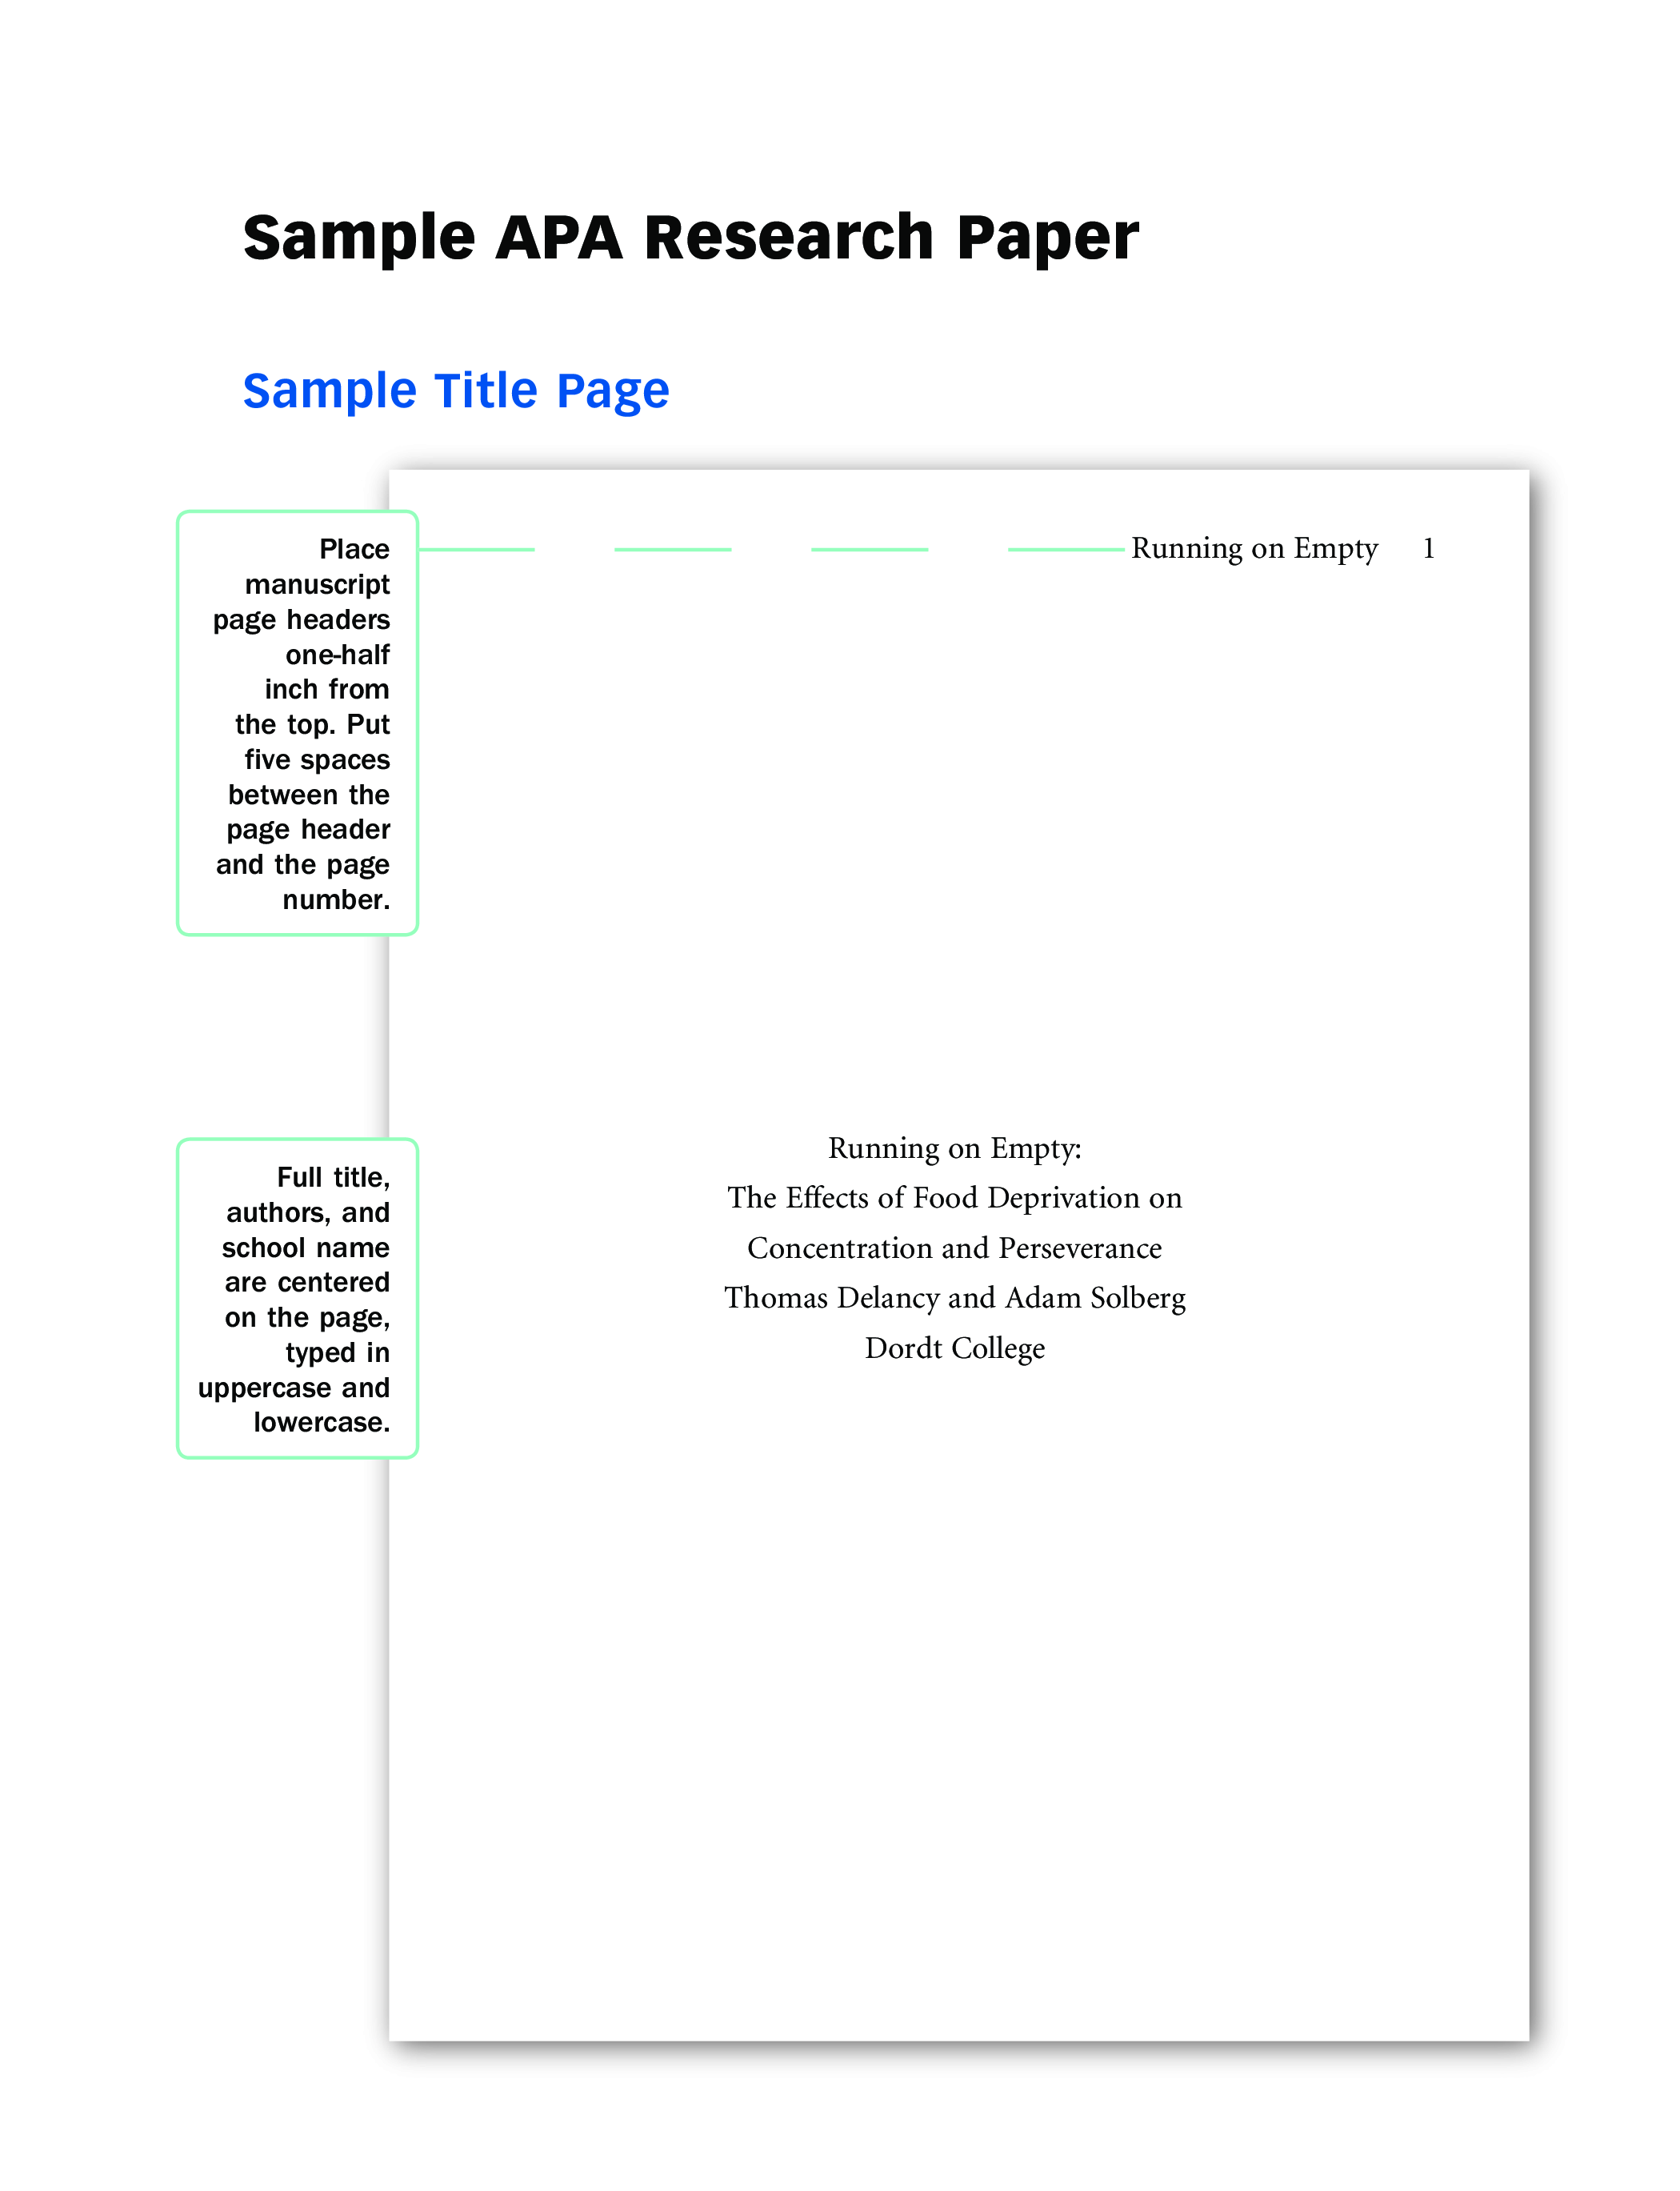 Research Paper Abstract | Templates at allbusinesstemplates.com